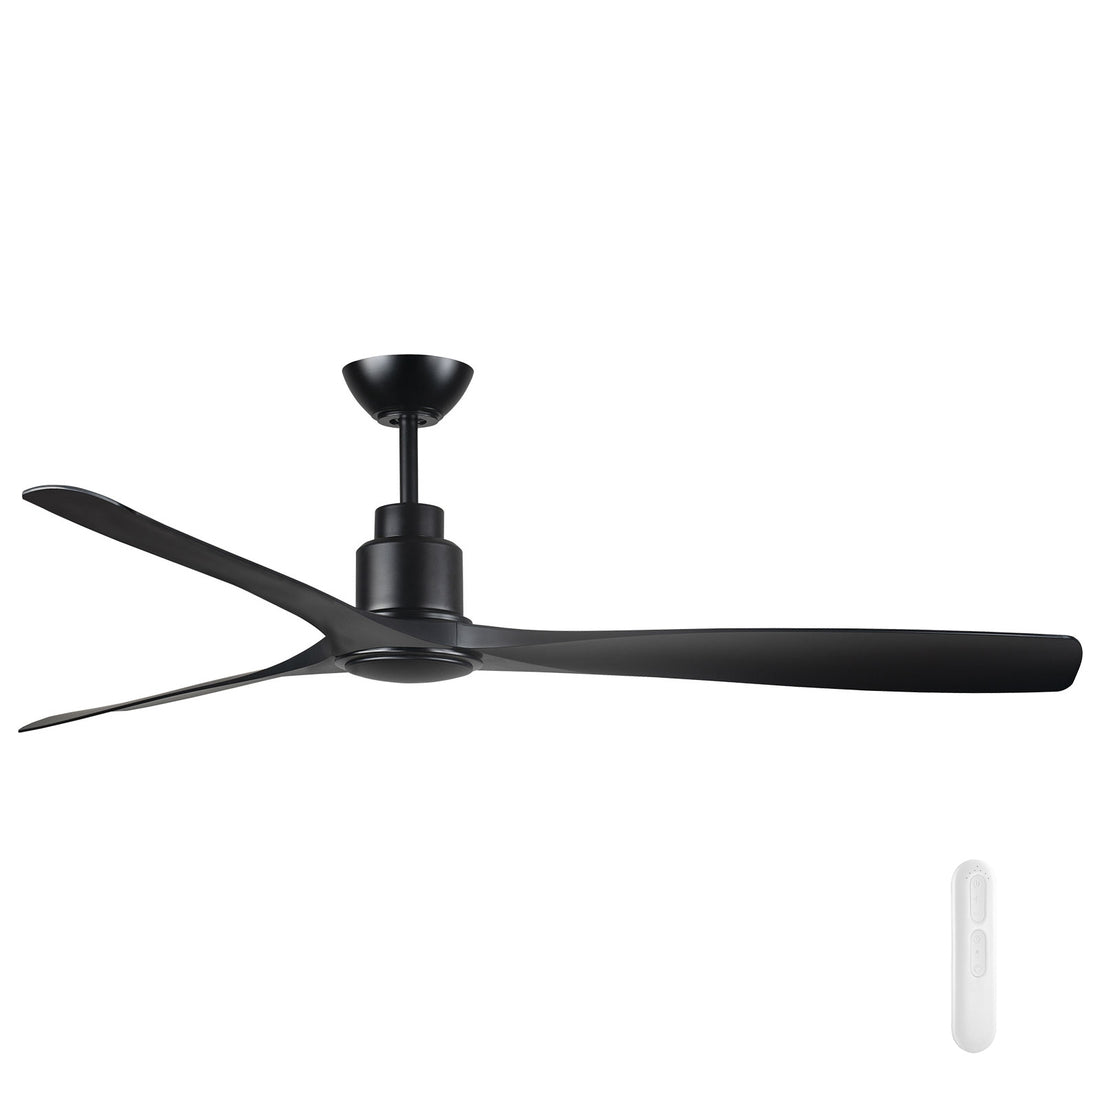 Iceman 152cm DC Ceiling Fan with Remote